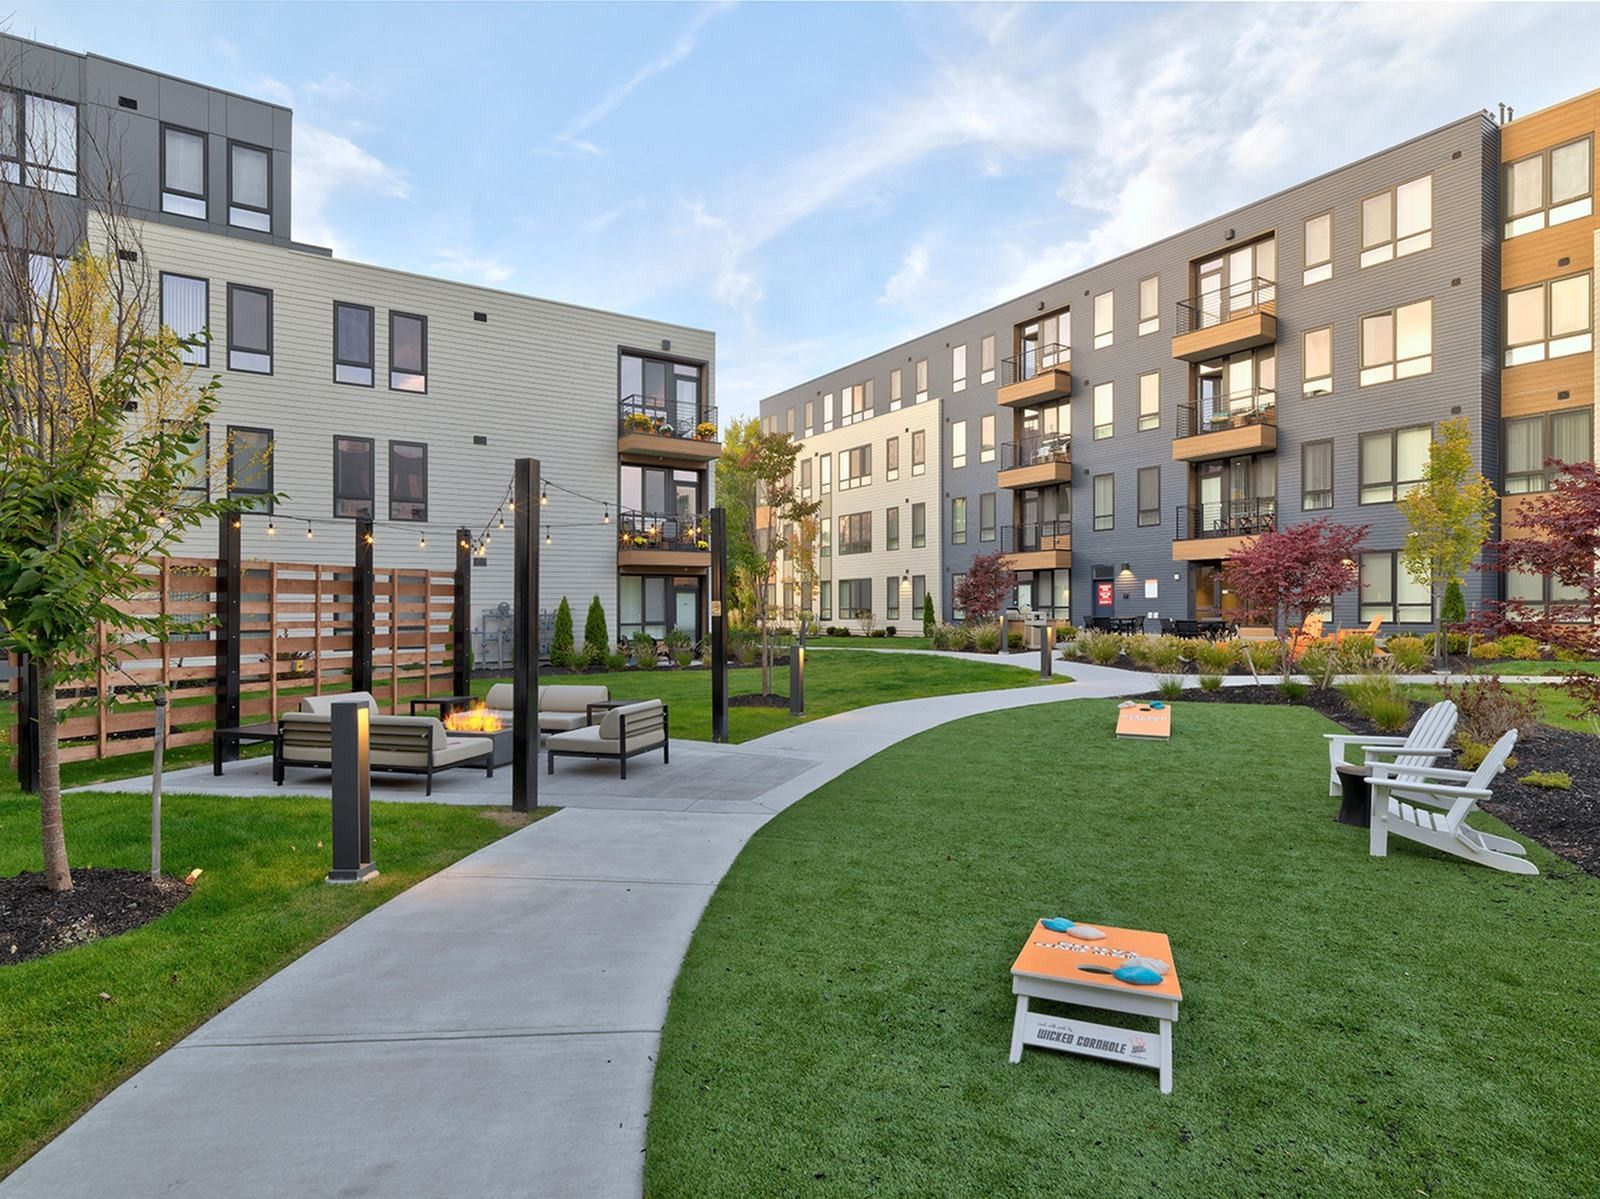 West End Yards outdoor area with walking path, chairs, and cornhole game.